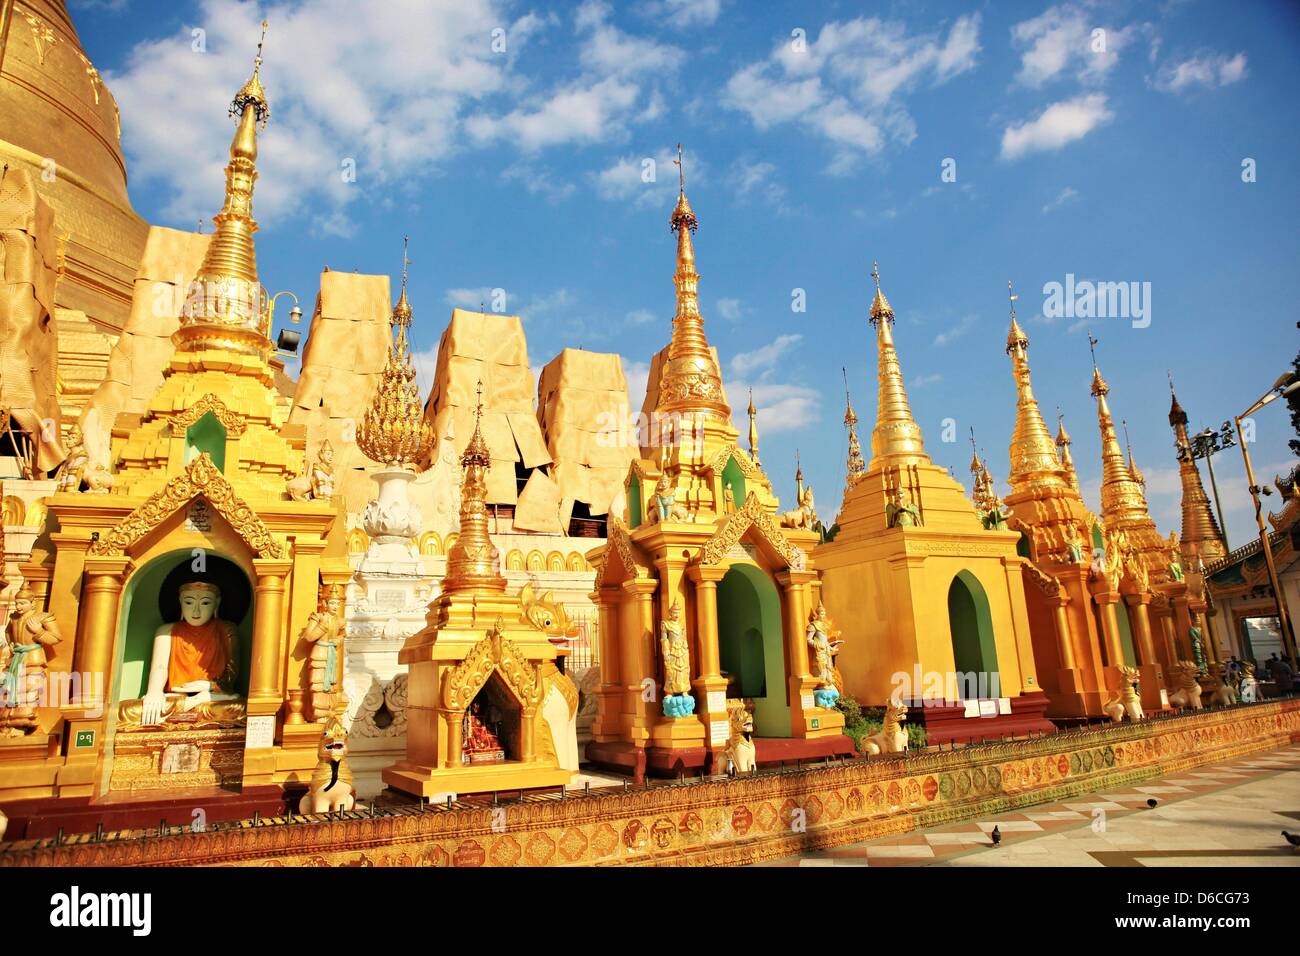 Buildings and places to pray at Shwedagon Pagoda in Yangon, Myanmar, 19 January 2013. Stock Photo